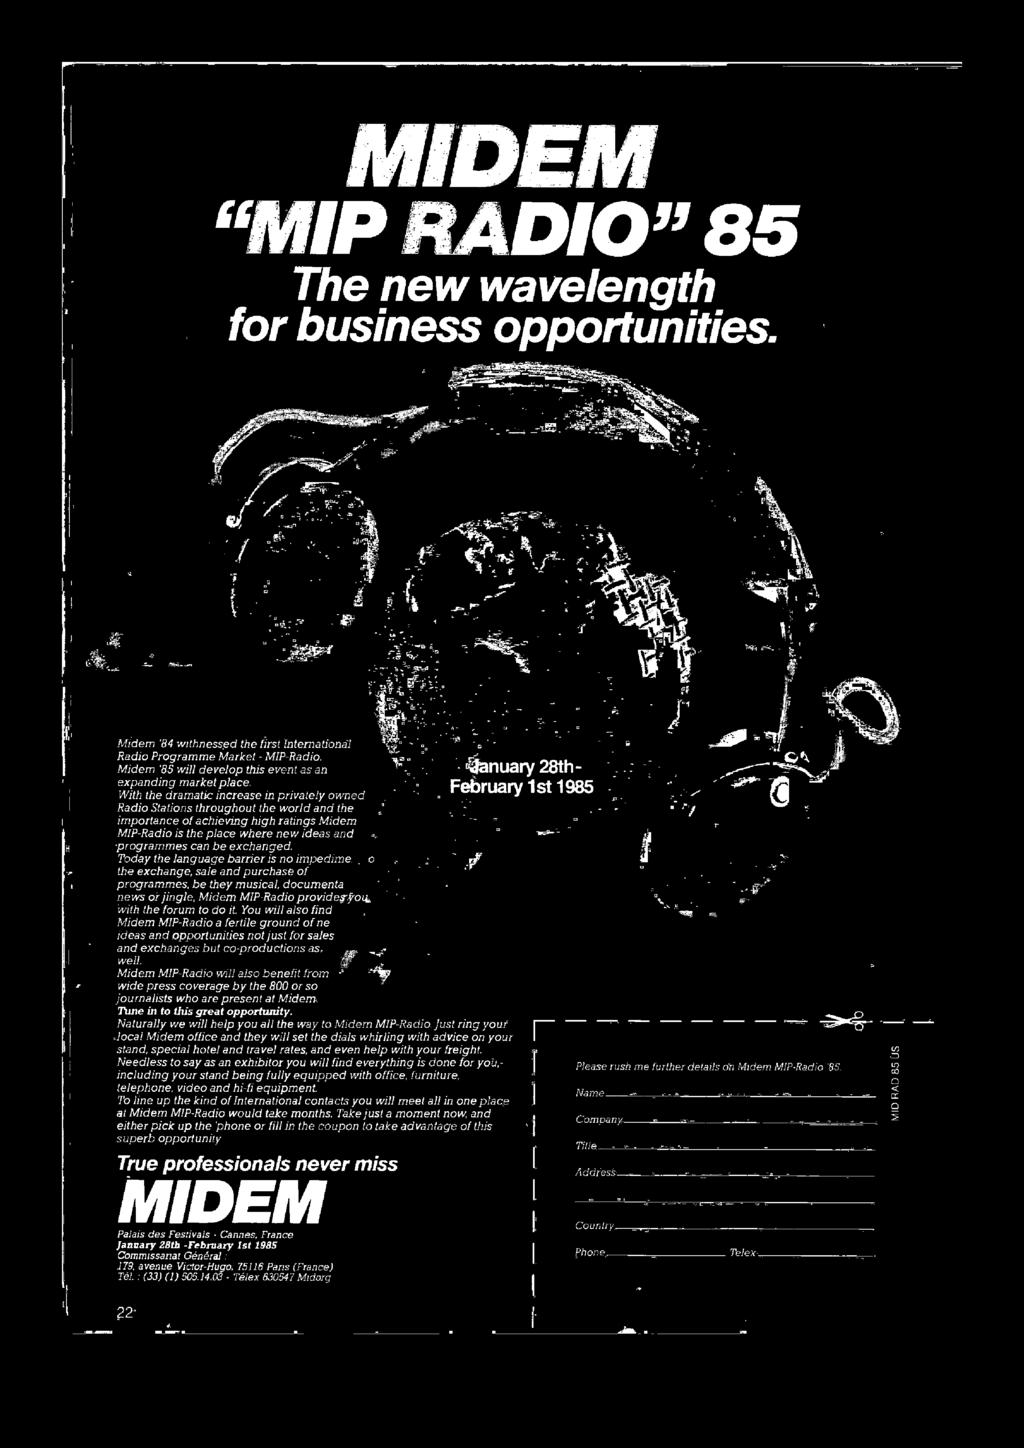 You will also find Midem MIP-Radio a fertile ground of ne ideas and opportunities not just for sales and exchanges but co -productions as well.